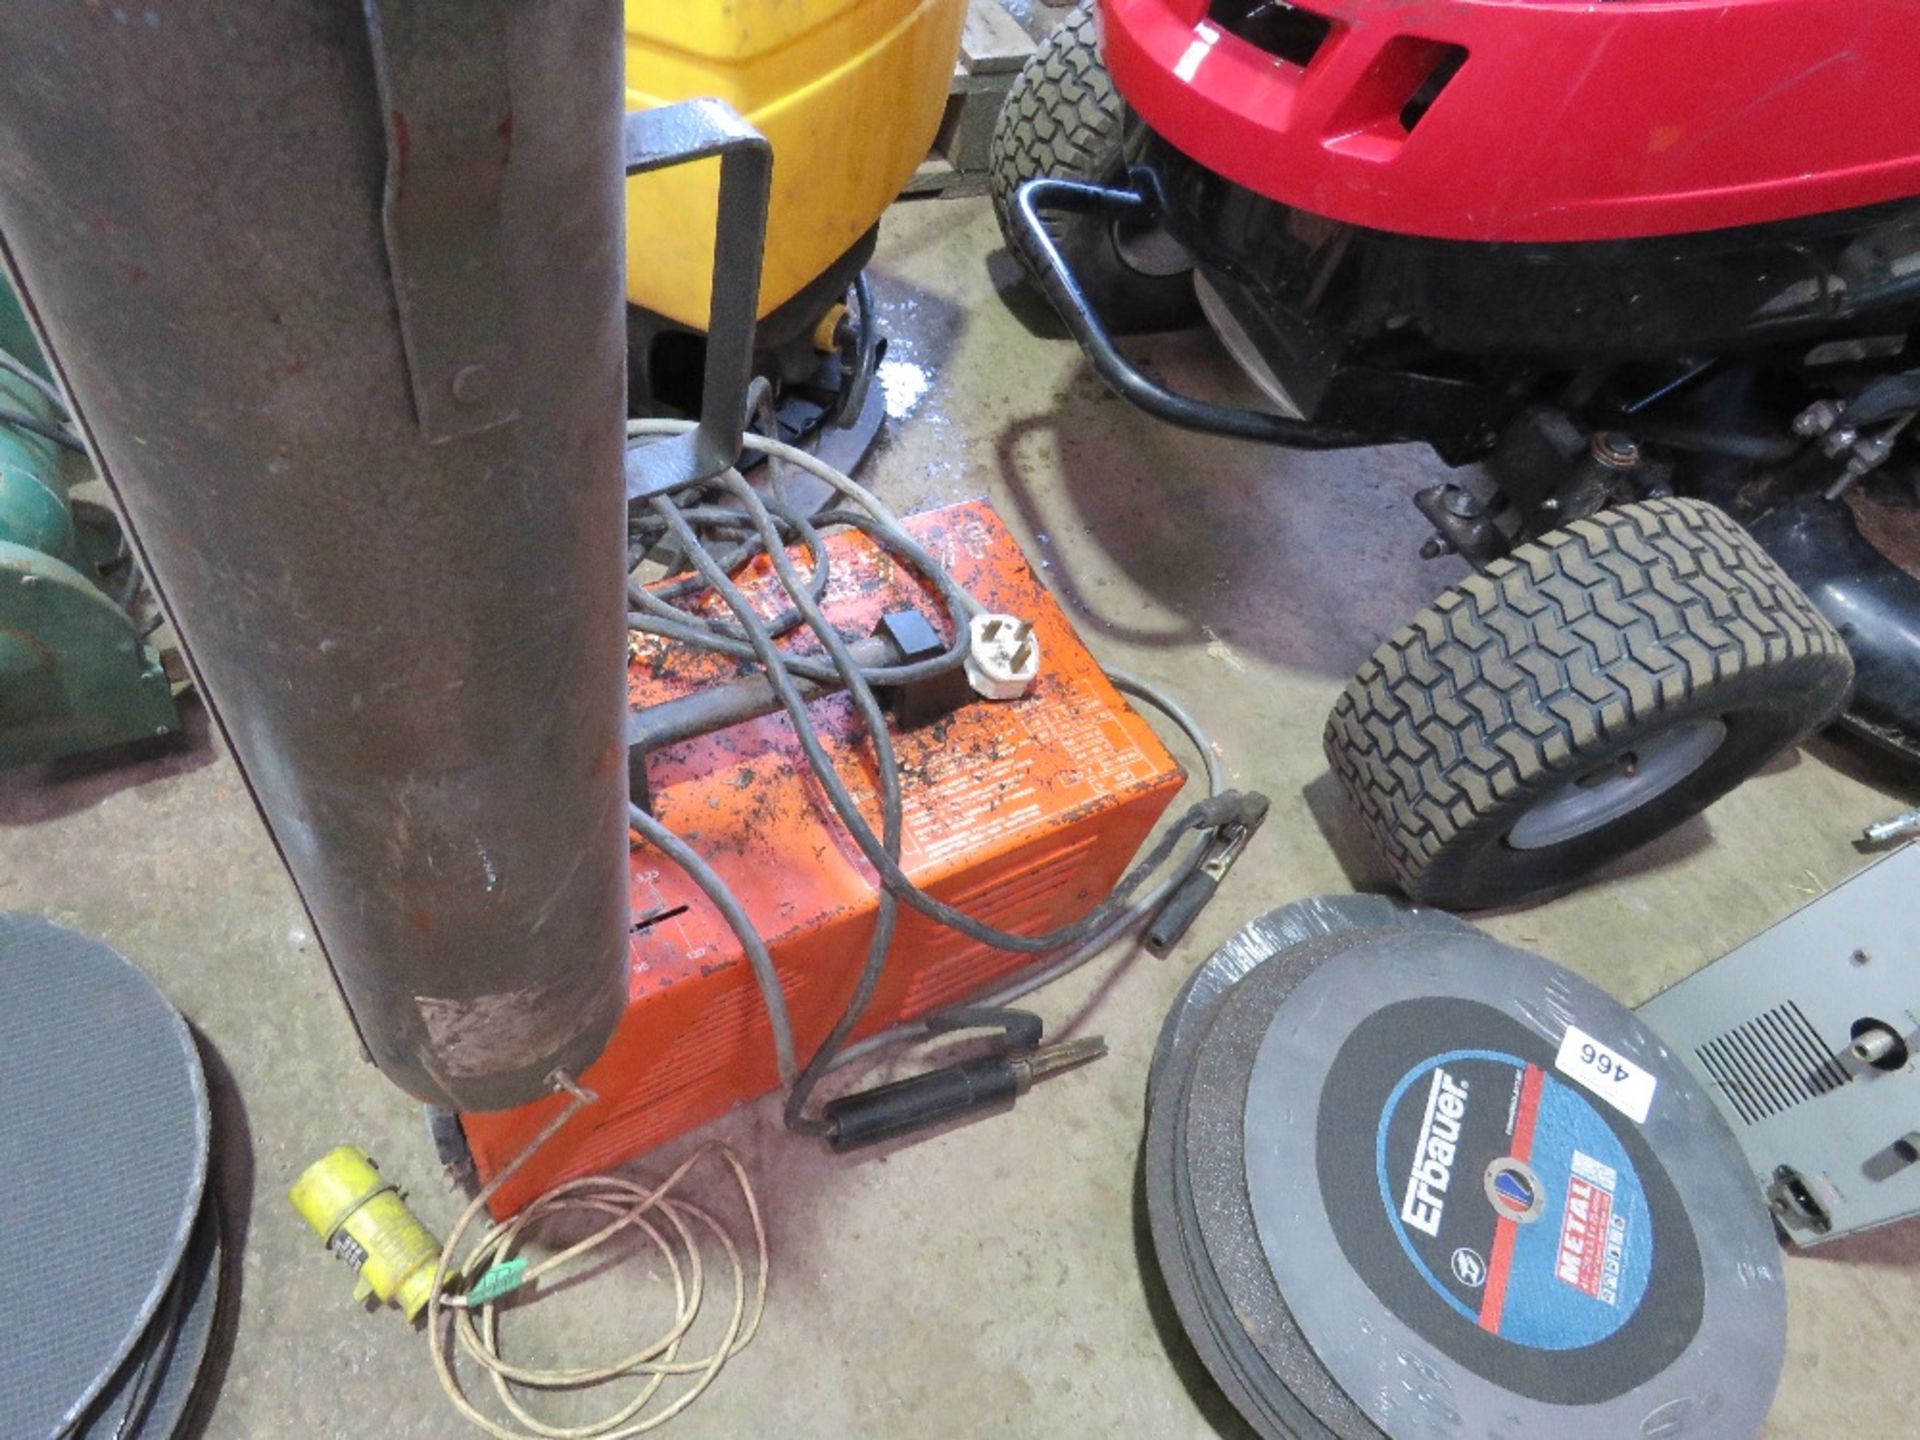 ELECTRIC ARC WELDER, 240VOLT PLUS A 110VOLT ROD DRIER. SOURCED FROM SITE CLOSURE/CLEARANCE. - Image 4 of 4